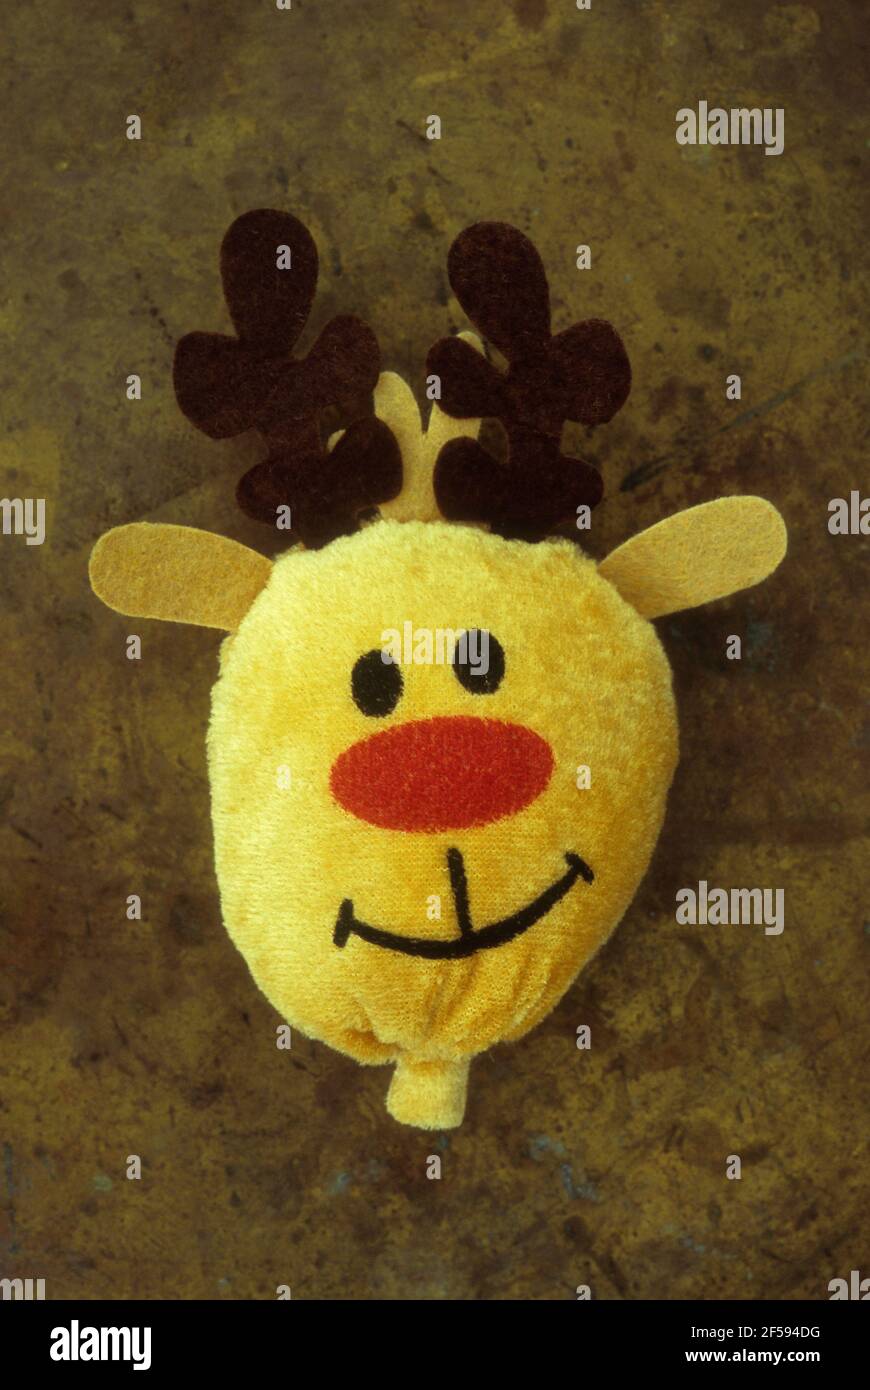 Soft toy stuffed velvet head of Christmas reindeer with yellow fur and red nose and friendly smile Stock Photo